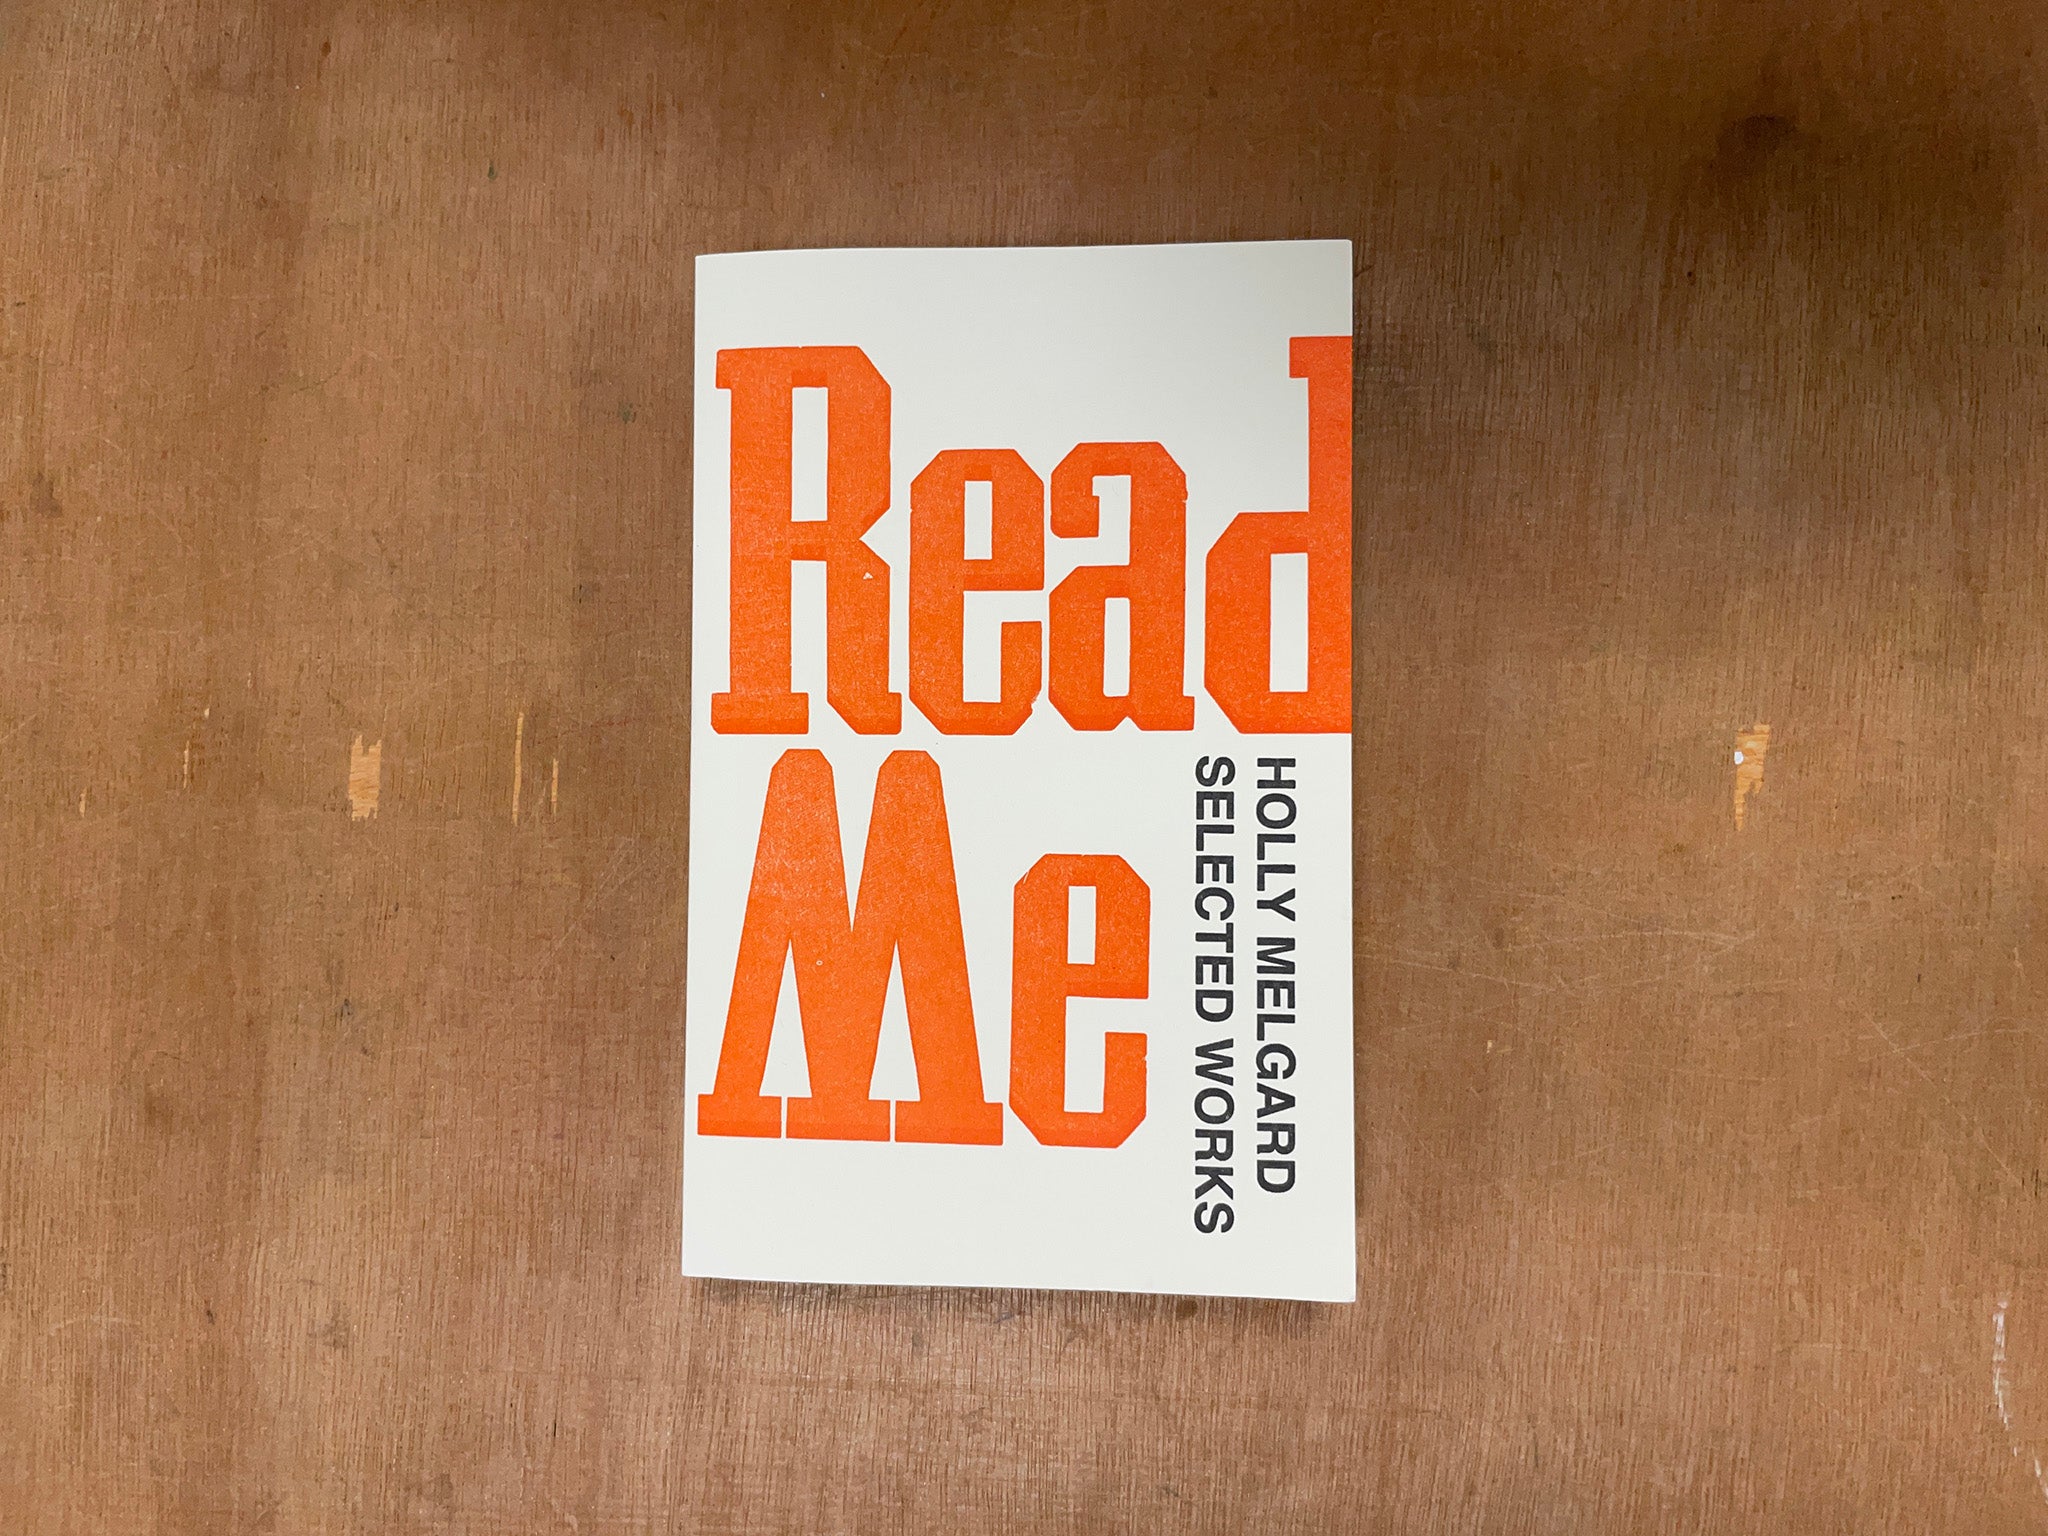 READ ME: SELECTED WORKS by Holly Melgard